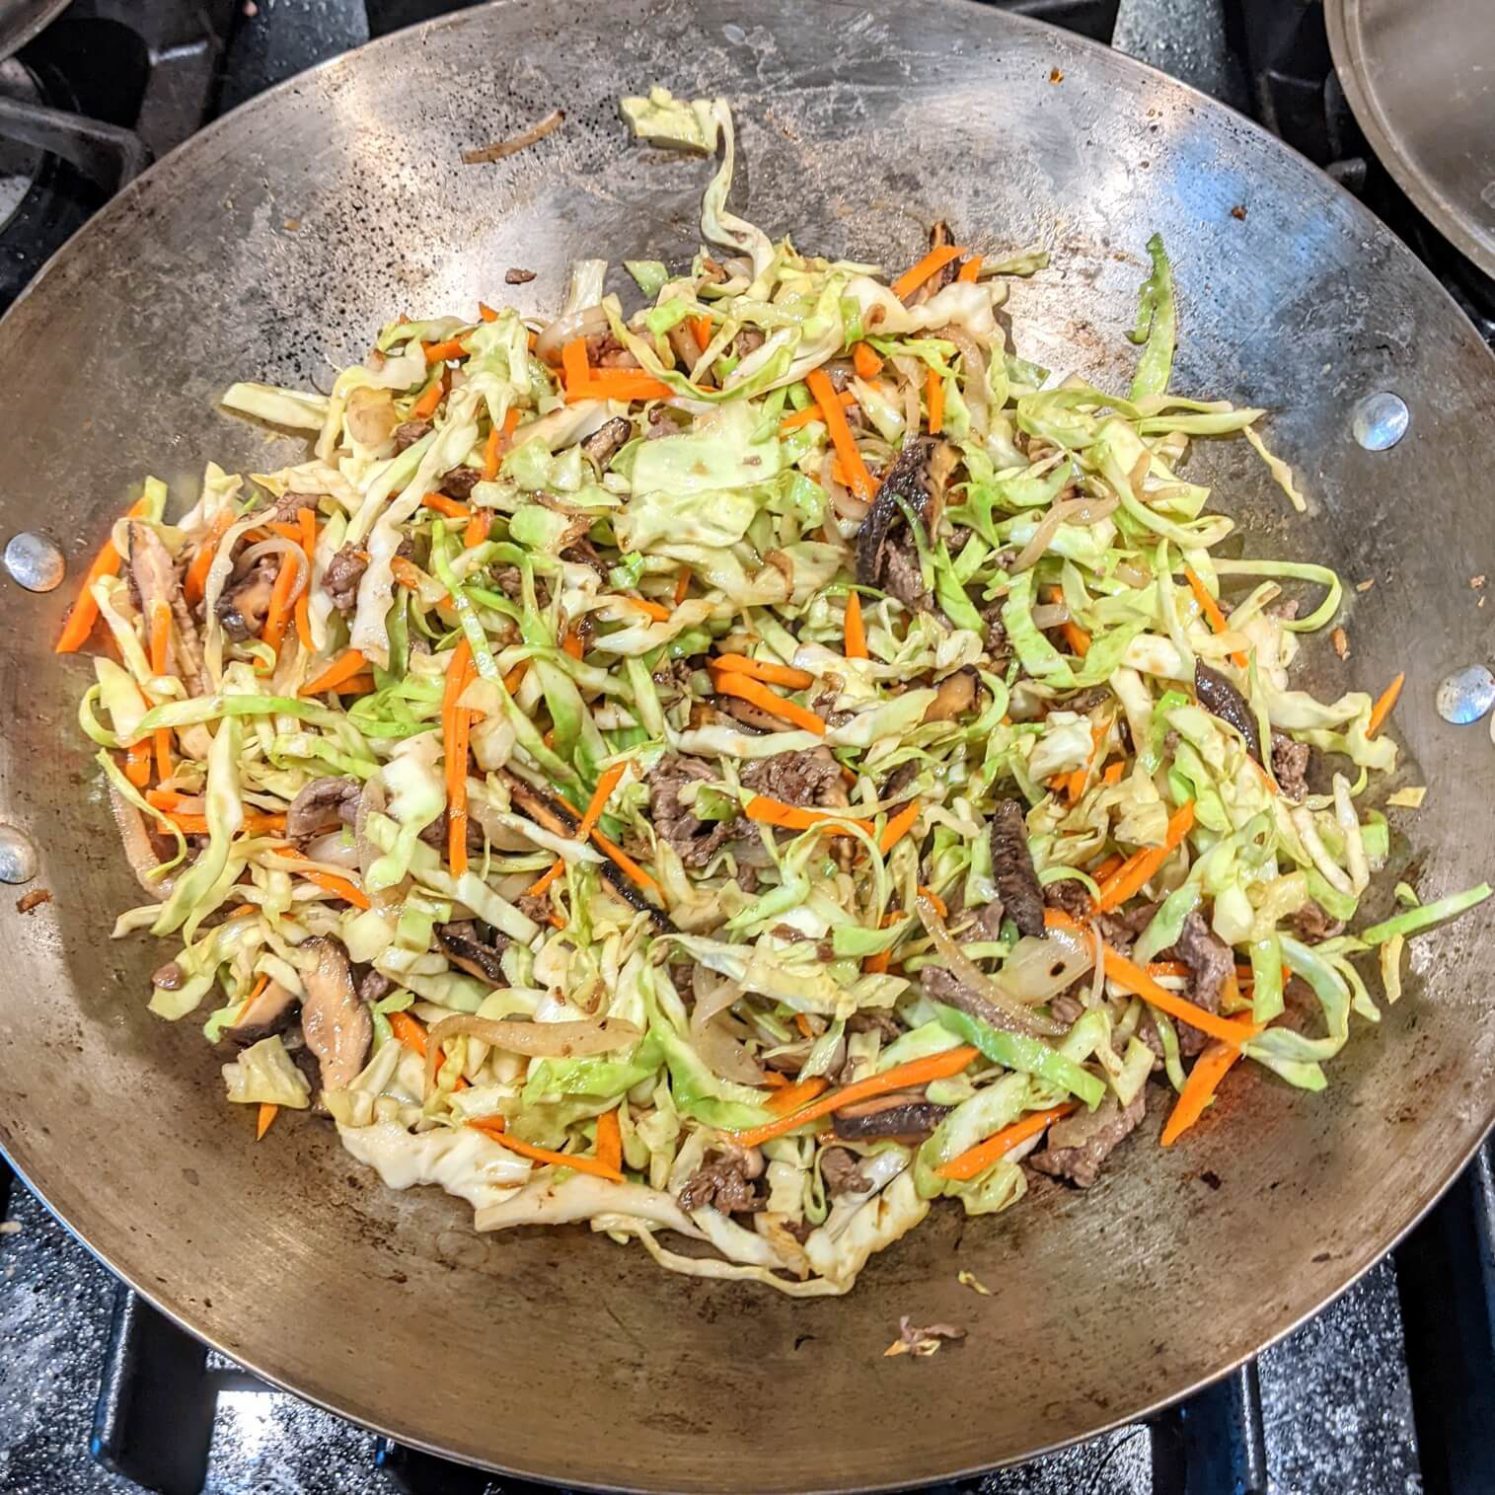 Meat, Cabbage, and Carrots Added to the Stir Fry